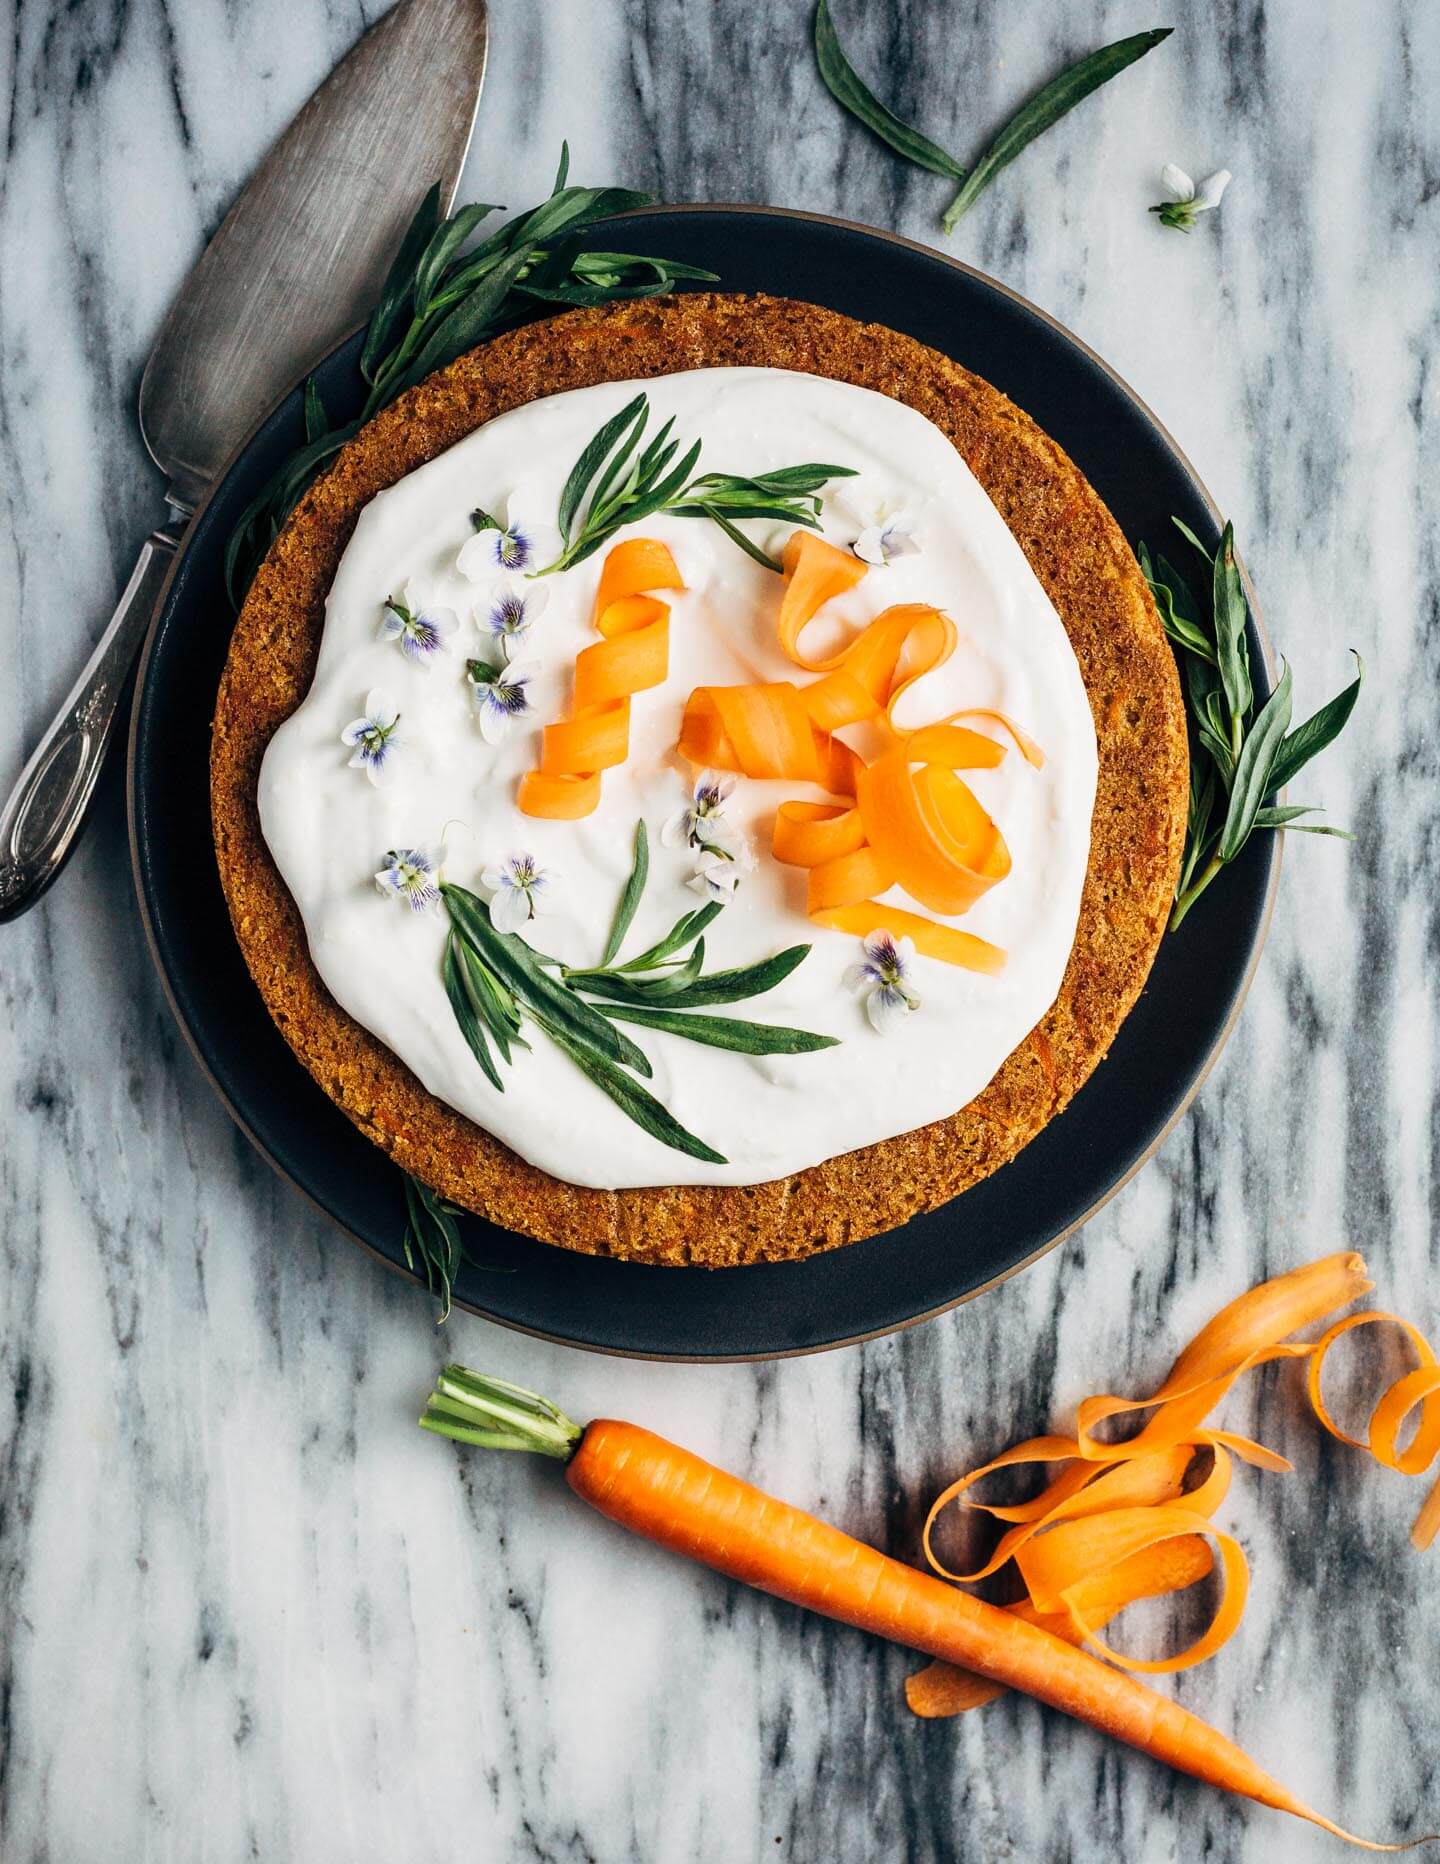 A simple olive oil carrot cake for spring celebrations! The tender, springy whole wheat crumb is suffused with nutty olive oil, fresh carrots, and orange zest. The cake is topped with an airy, lightly sweet yogurt and cream cheese frosting, carrot ribbons, tarragon, and edible flowers. 